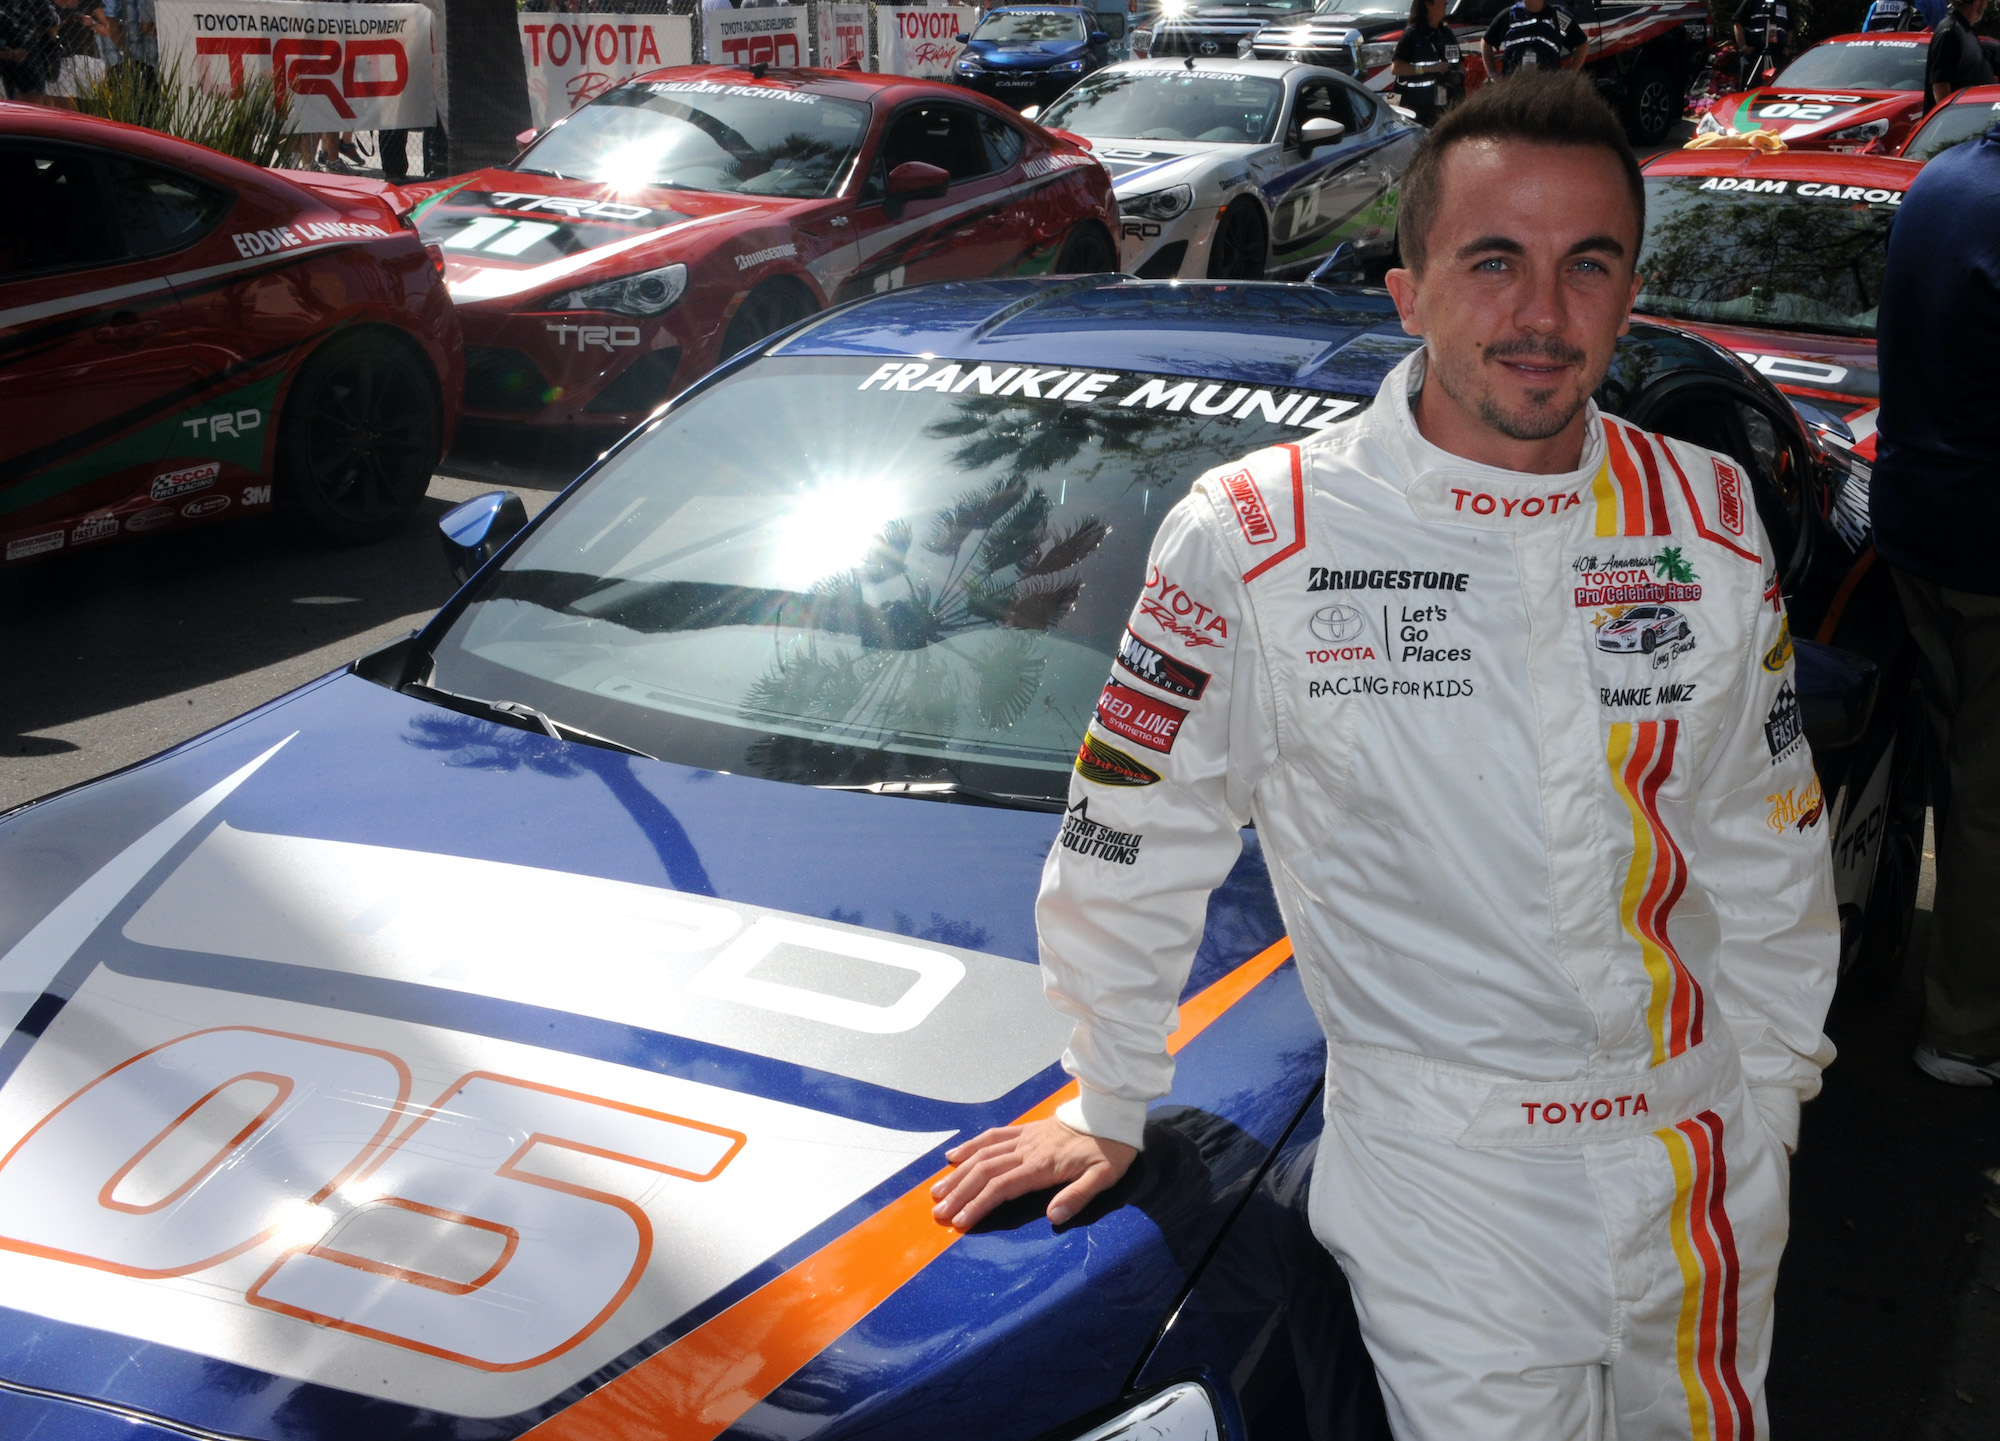 Frankie Muniz Addresses Whether He’s Being Taken Seriously in NASCAR and Details His Plans to Change the Minds of Those Who Doubt Him